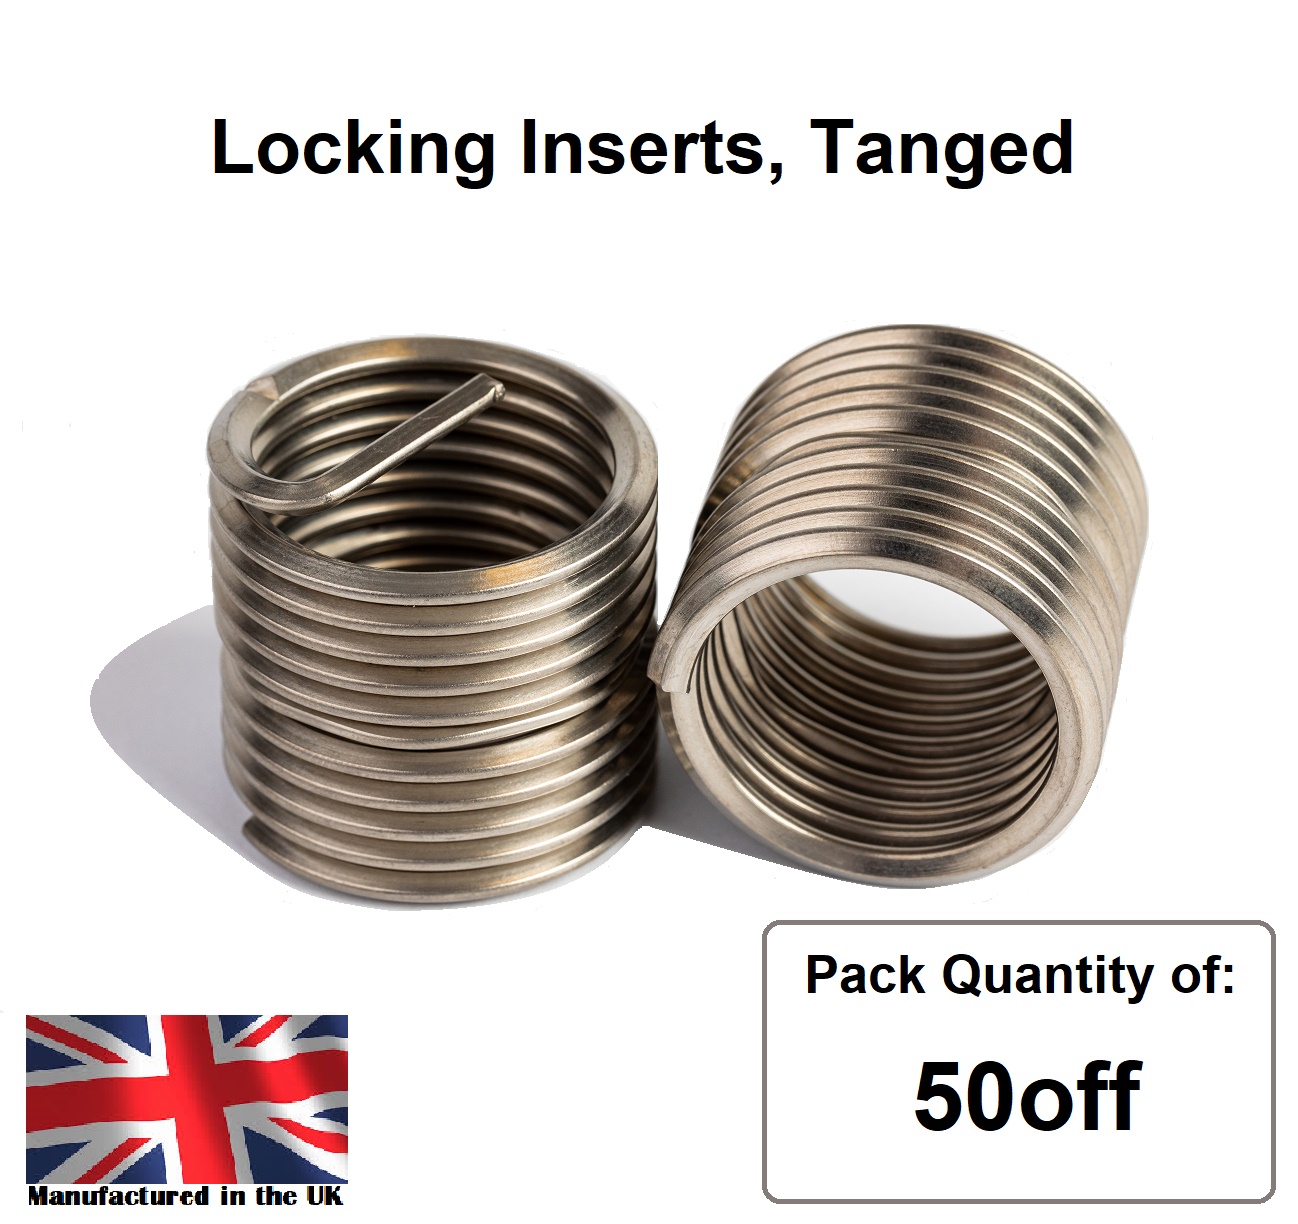 M5 x 0.8 x 1.5D Metric Coarse, LOCKING, Tanged, Wire Thread Repair Insert, 304/A2 Stainless (Pack 50)